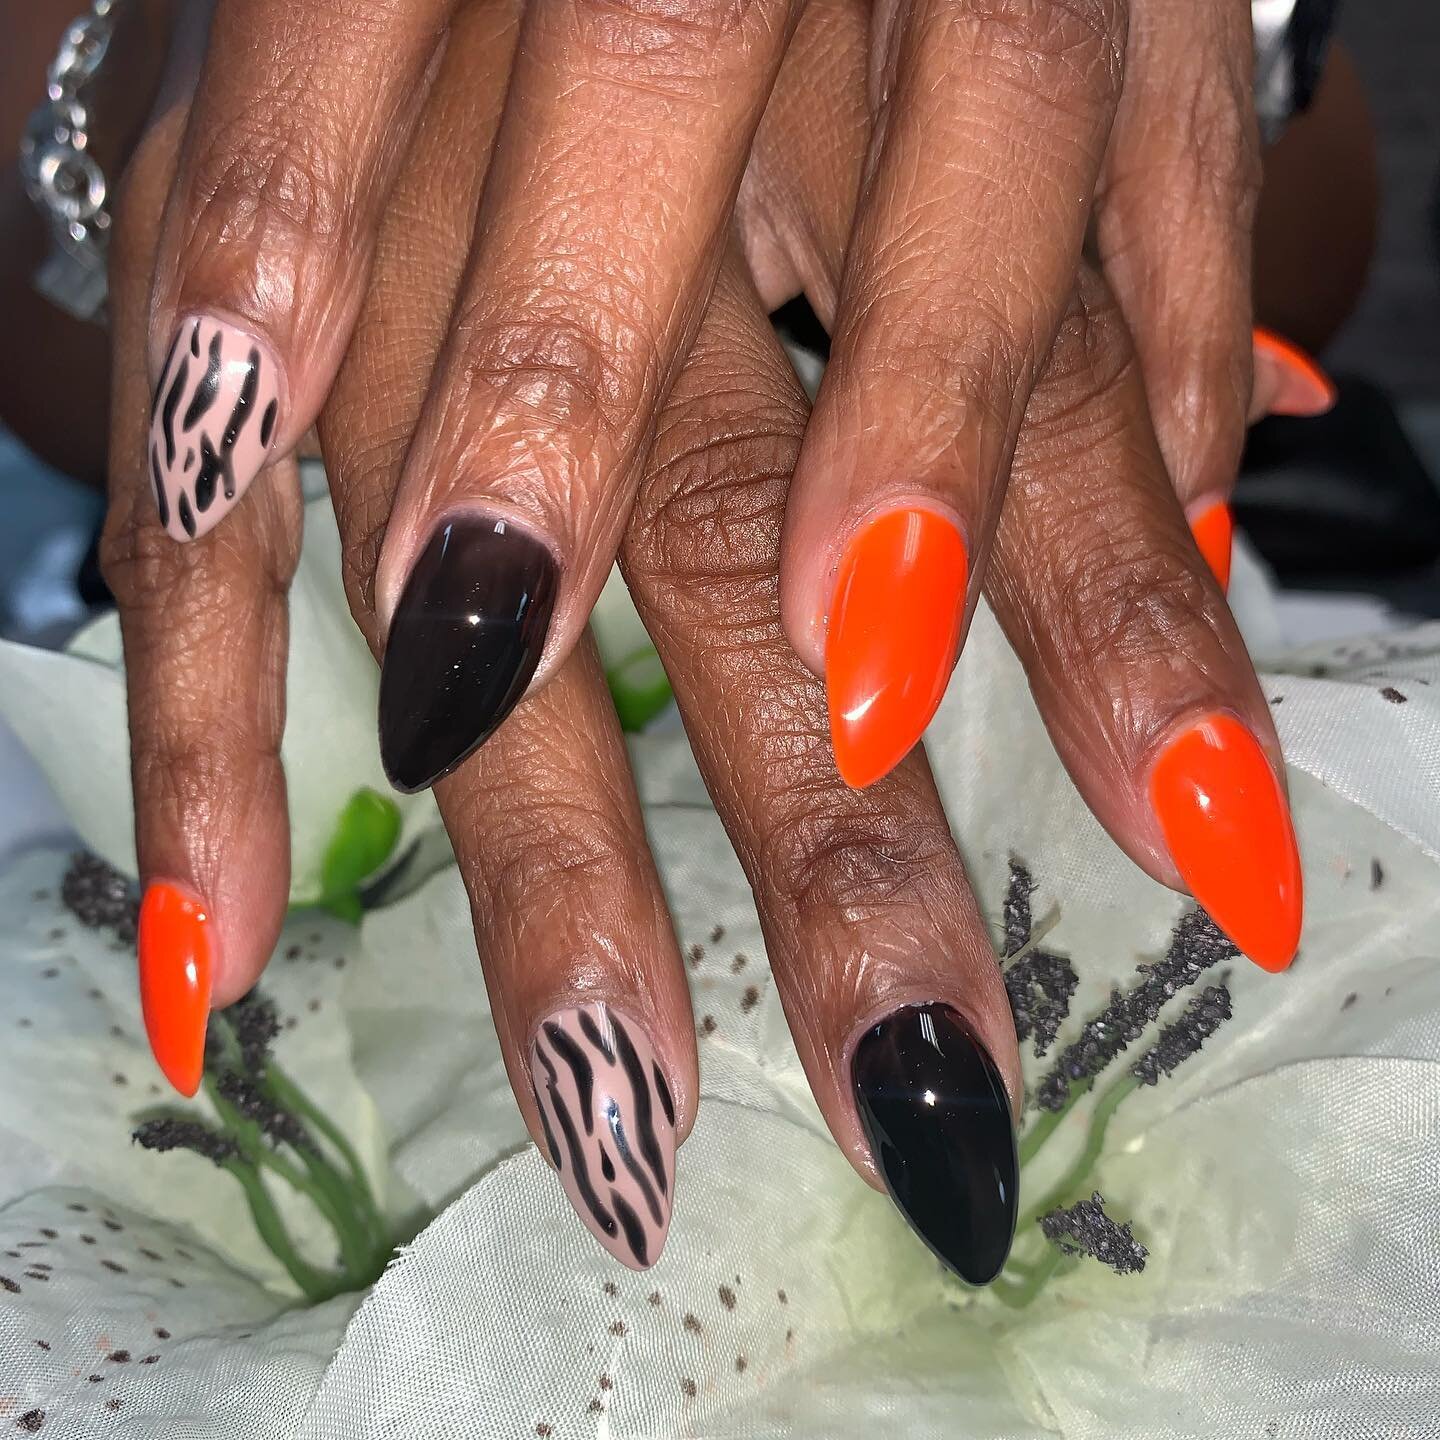 Every now and then we gotta switch it up, and my client @regandryanmom let&rsquo;s me do just that&hellip;
#stilettonails #myversion #simpleartwork #colors 

Book your beauty with me!